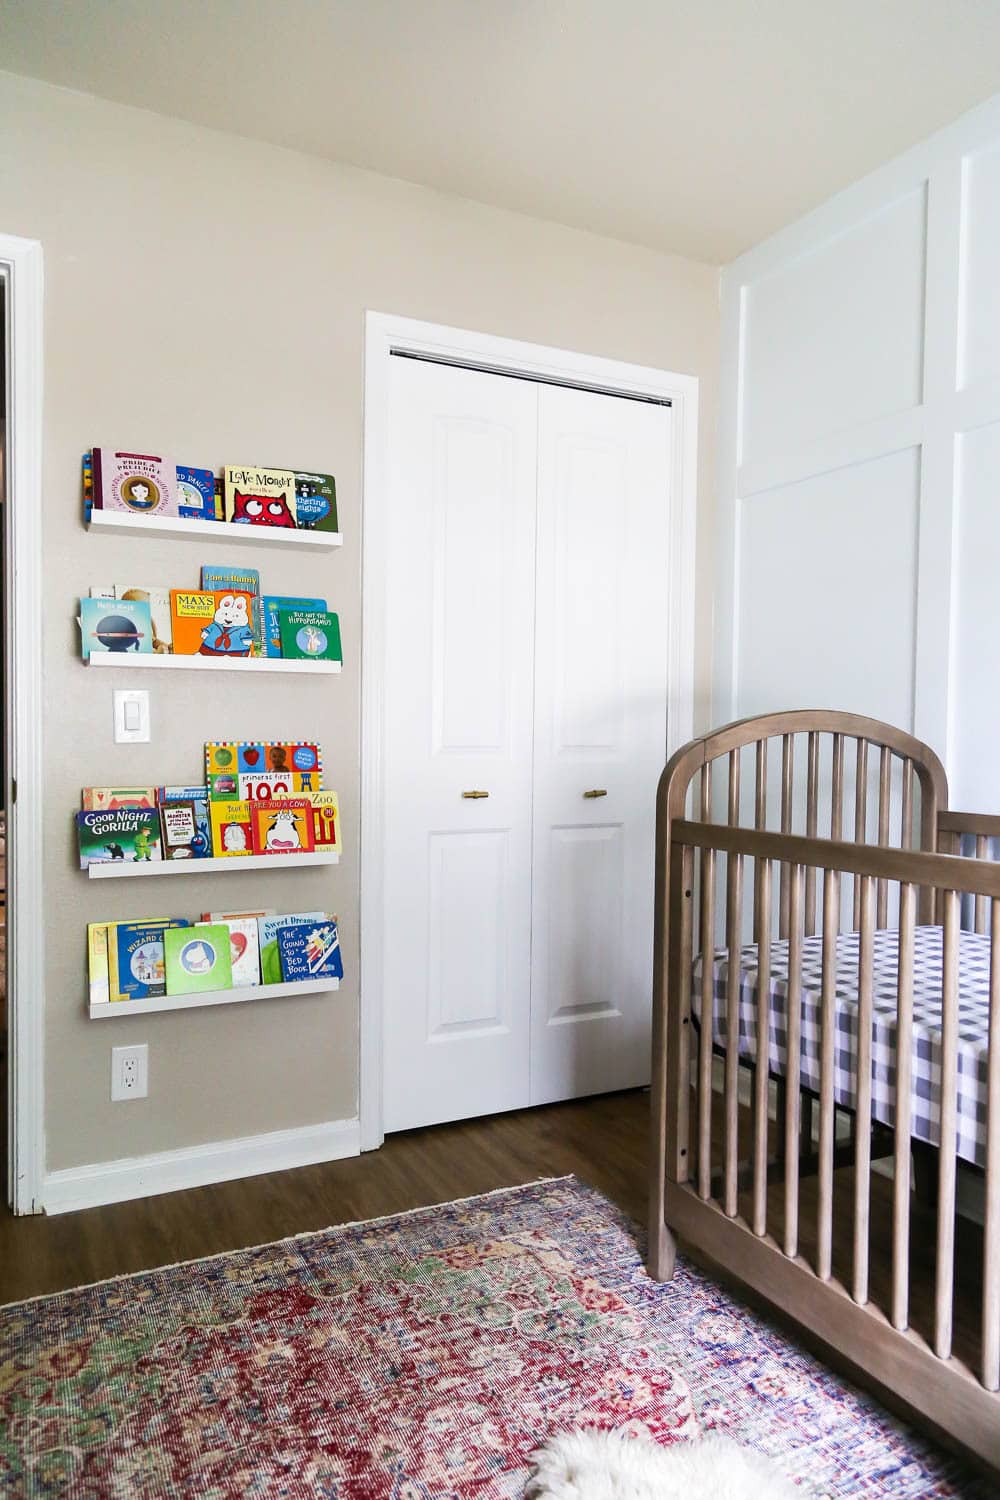 Nursery ideas that are just great